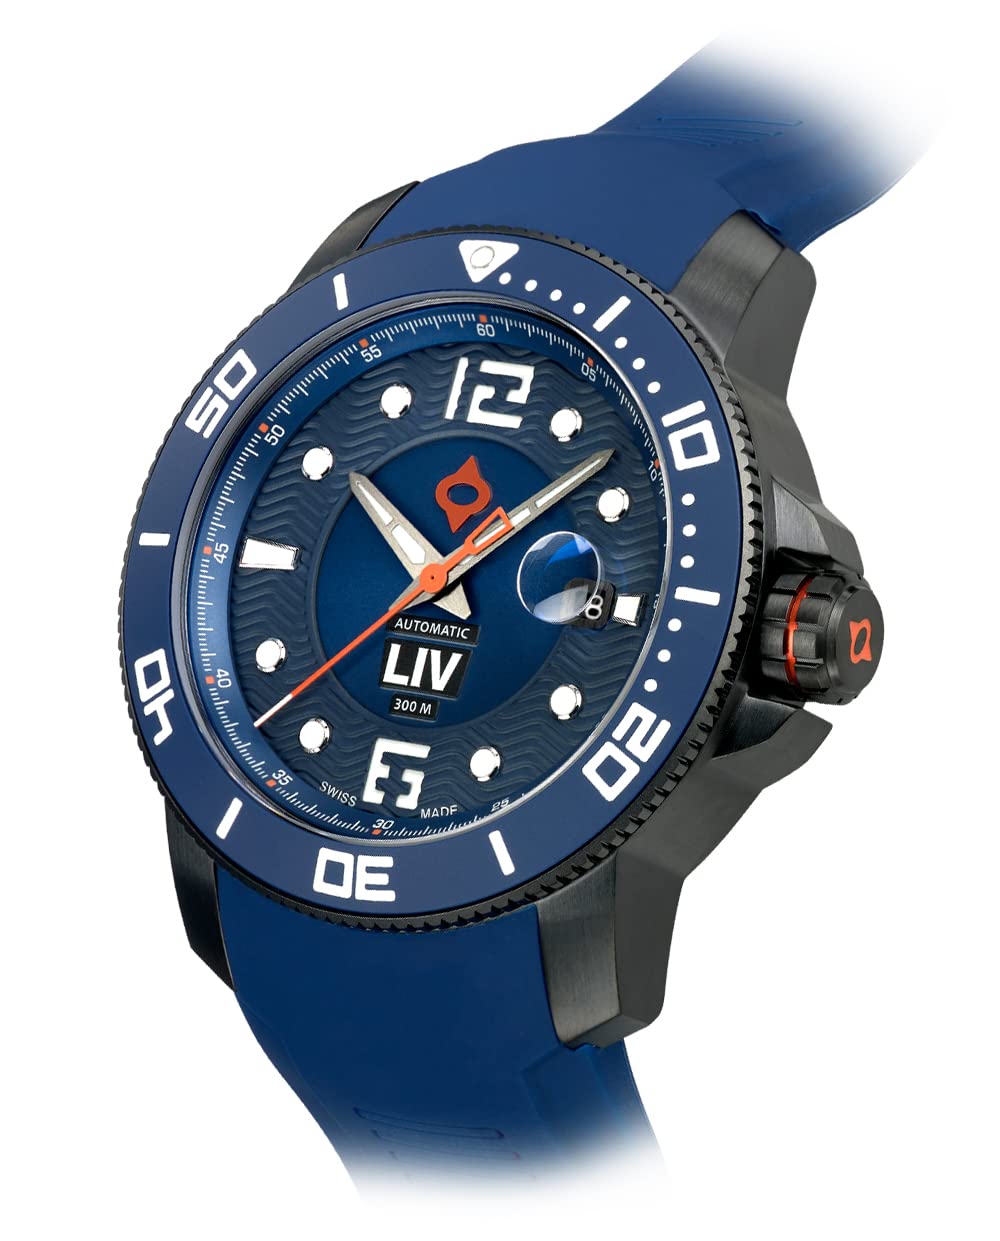 LIV GX-Diver's 44MM Swiss Automatic -1000 Feet Water Resistant -Surgical Grade 316L Stainless Steel - Unidirectional Ceramic Bezel - BGW9 Luminova - Scratch Resistant Sapphire Crystal - Dive Watches for Men